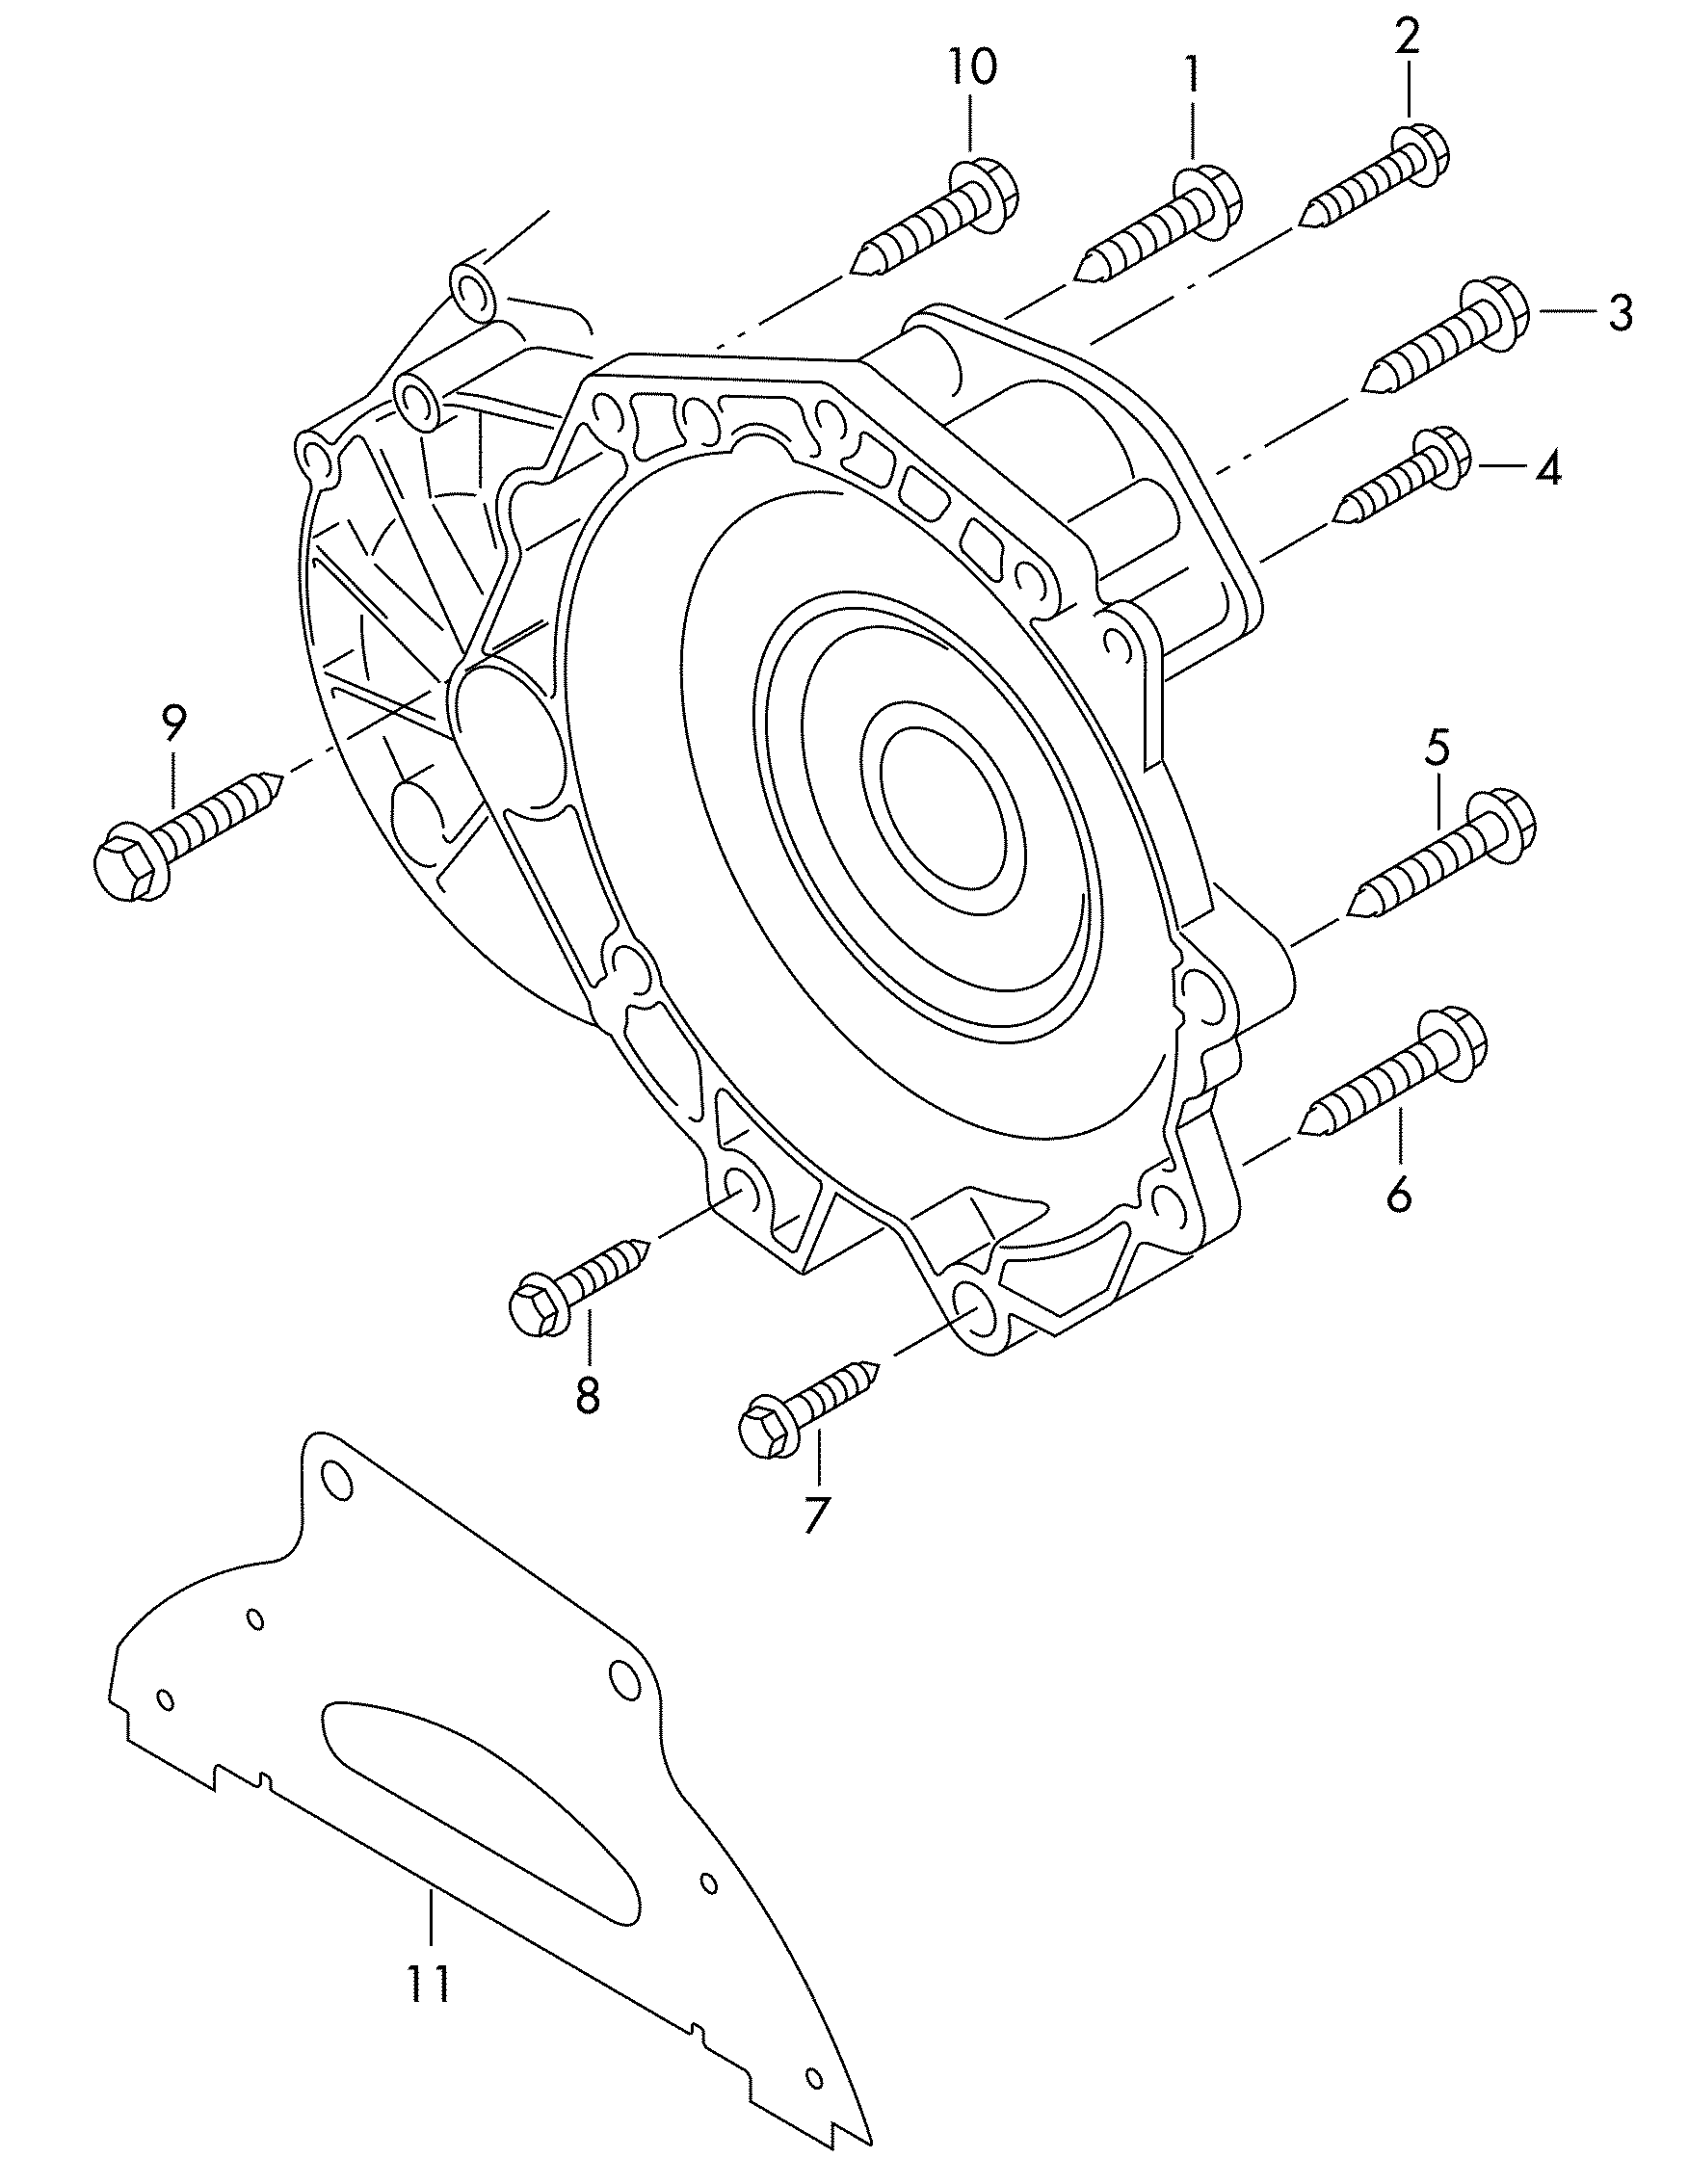 mounting parts for engine and<br>transmissionFor 7-speed dual clutch<br>gearbox  - Rapid - rap